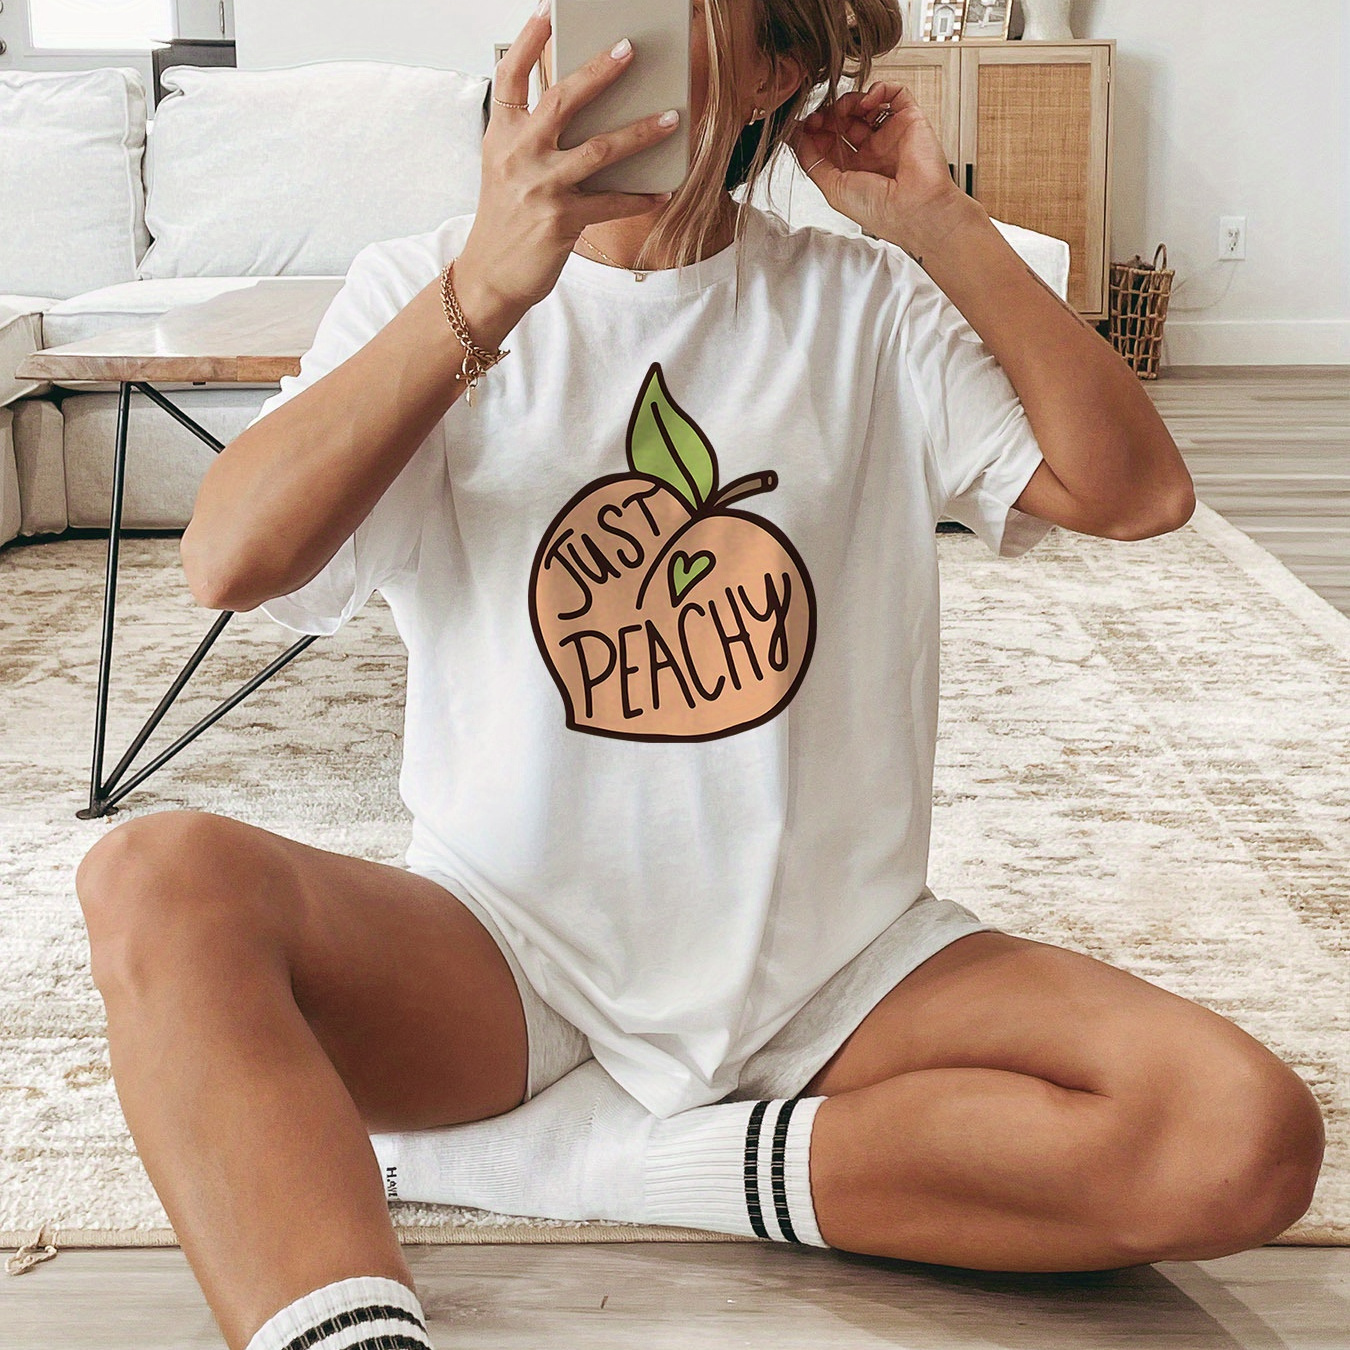 

Just Peachy Print T-shirt, Short Sleeve Crew Neck Casual Top For Summer & Spring, Women's Clothing